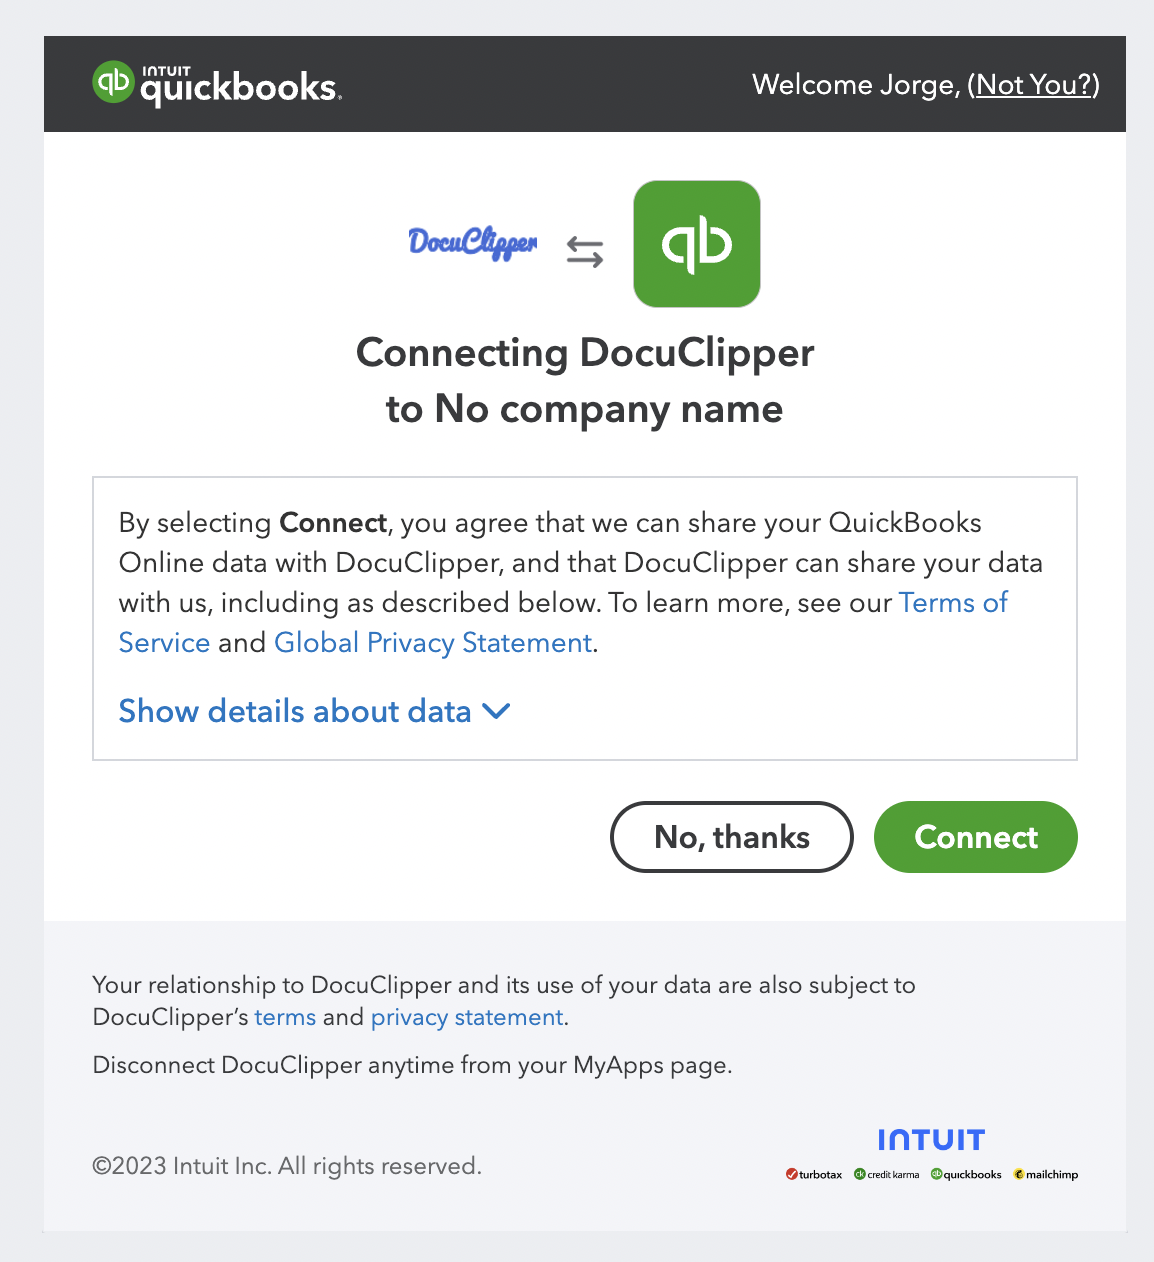 Review on the Intuit App Store QuickBooks DocuClipper 3